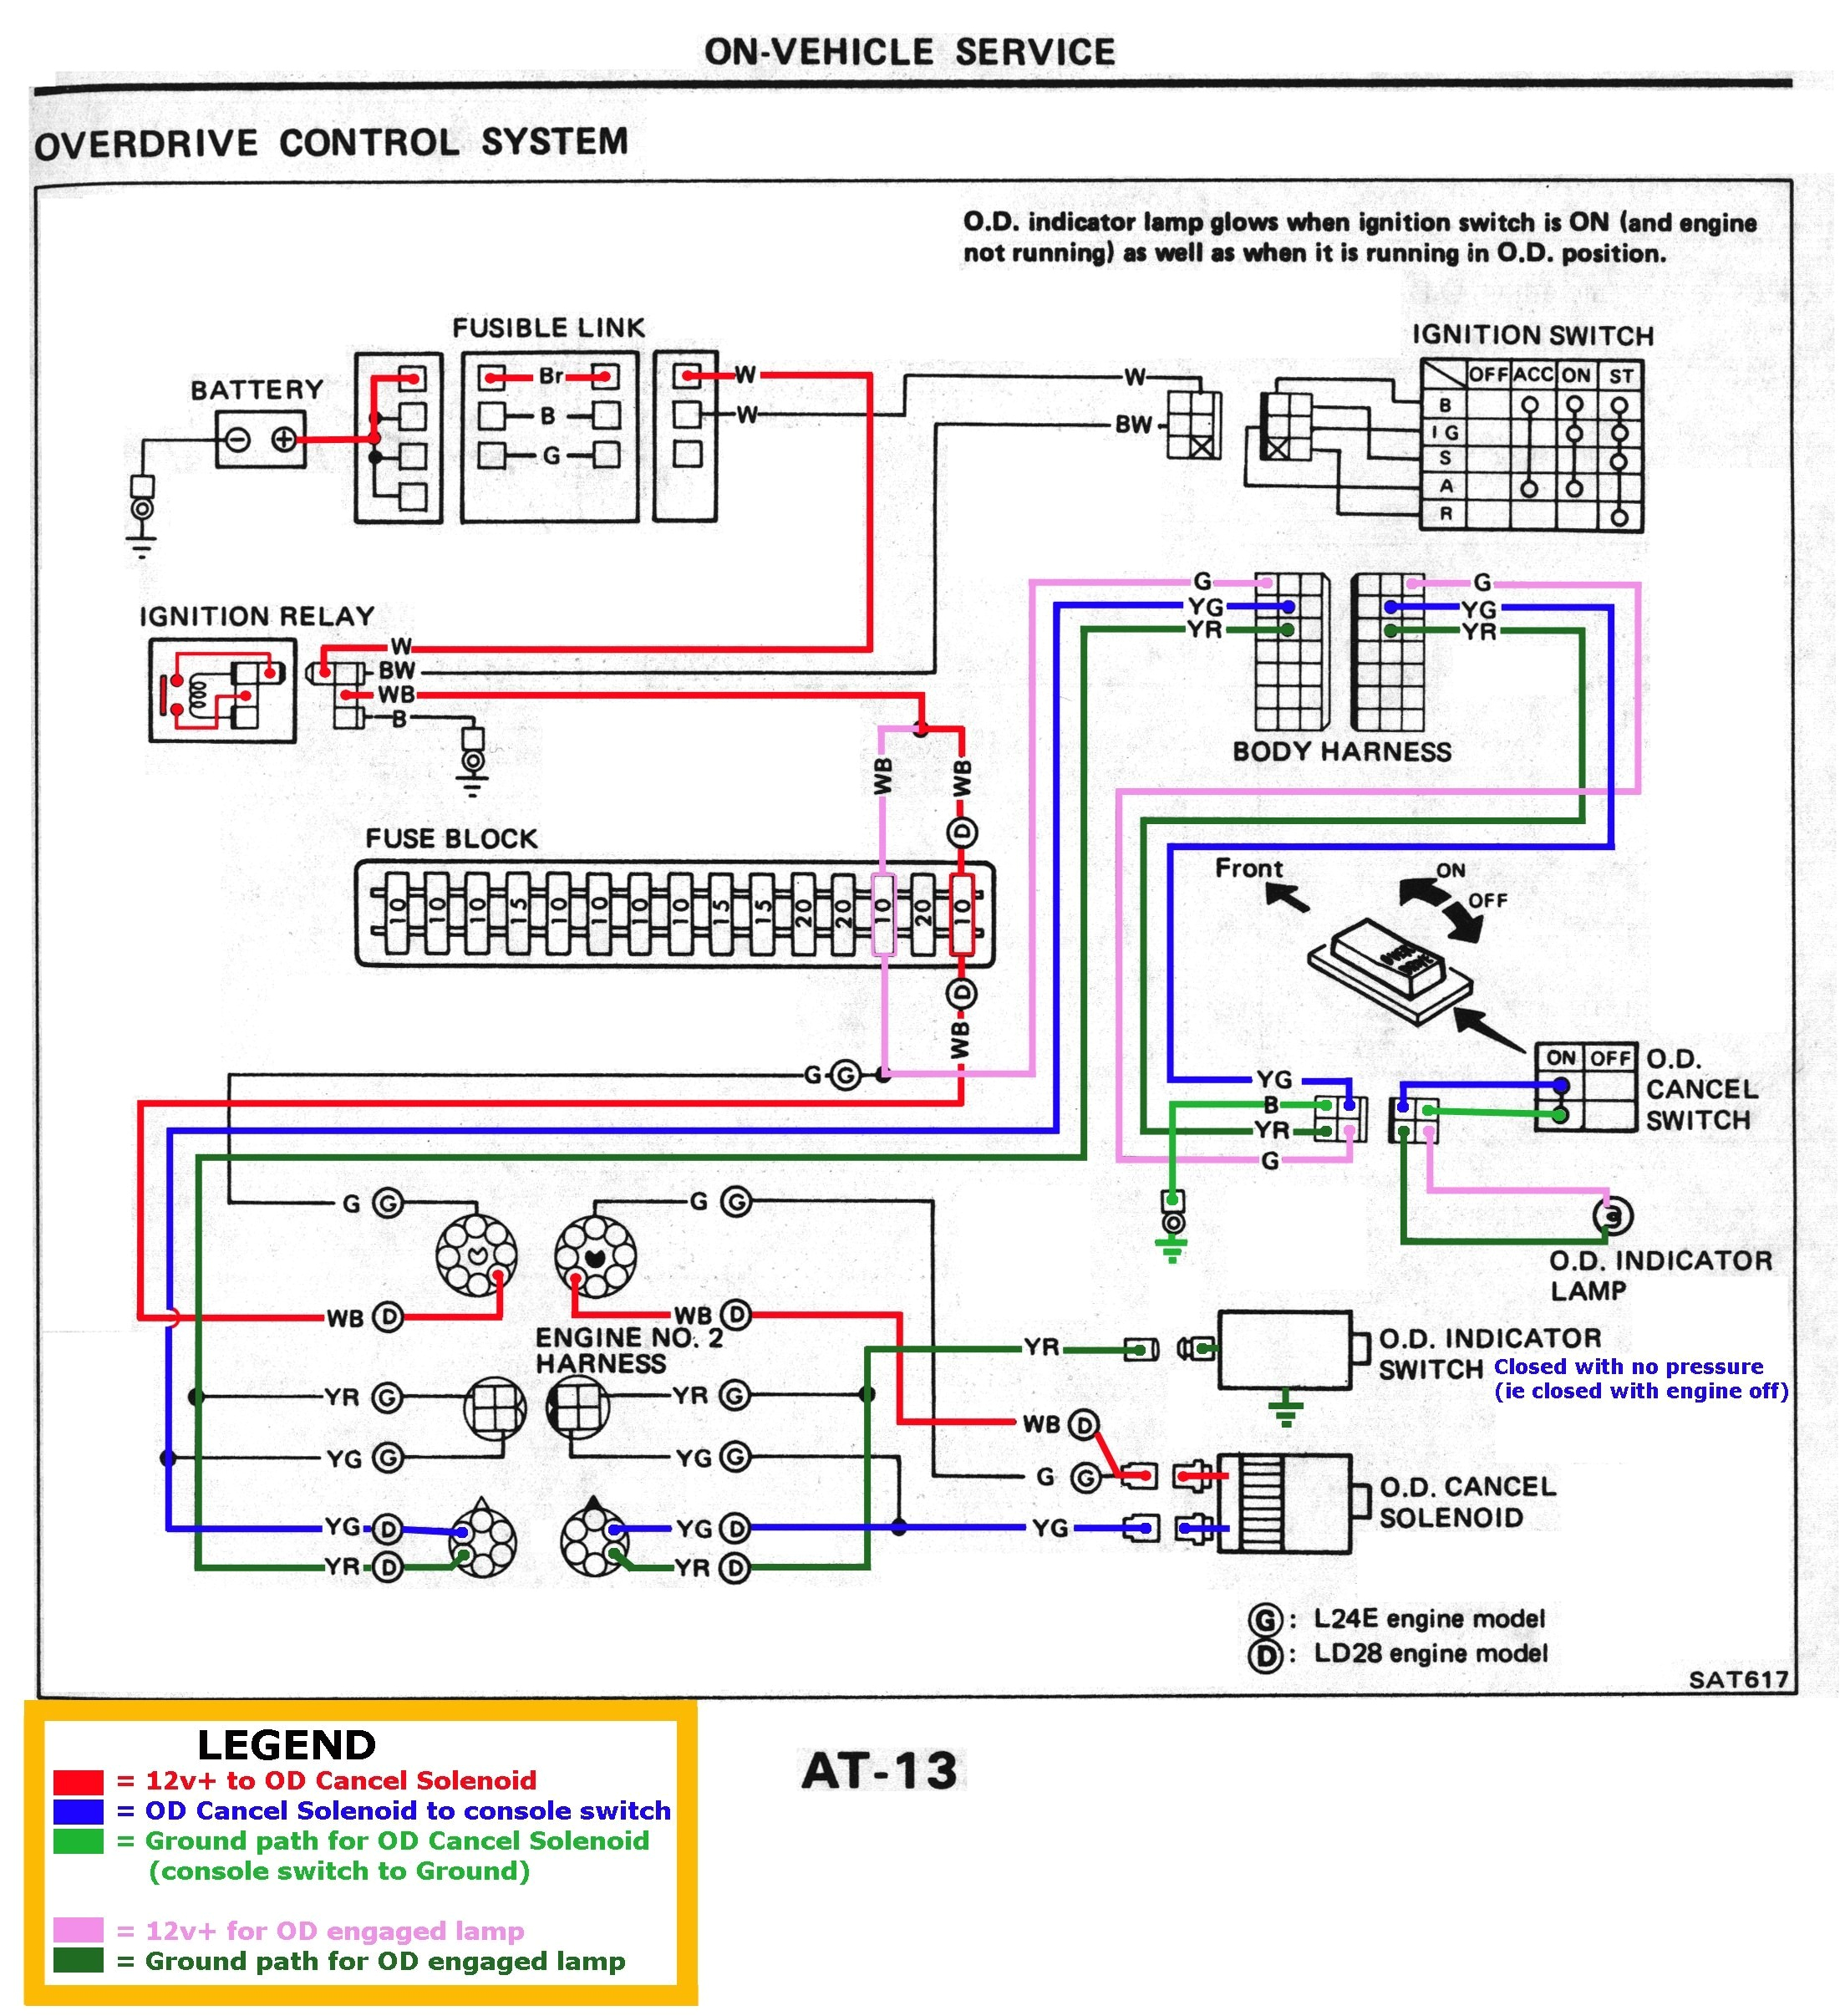 300zx fuse box ground trusted wiring diagrams u2022 1990 ford ranger fuse box diagram 1990